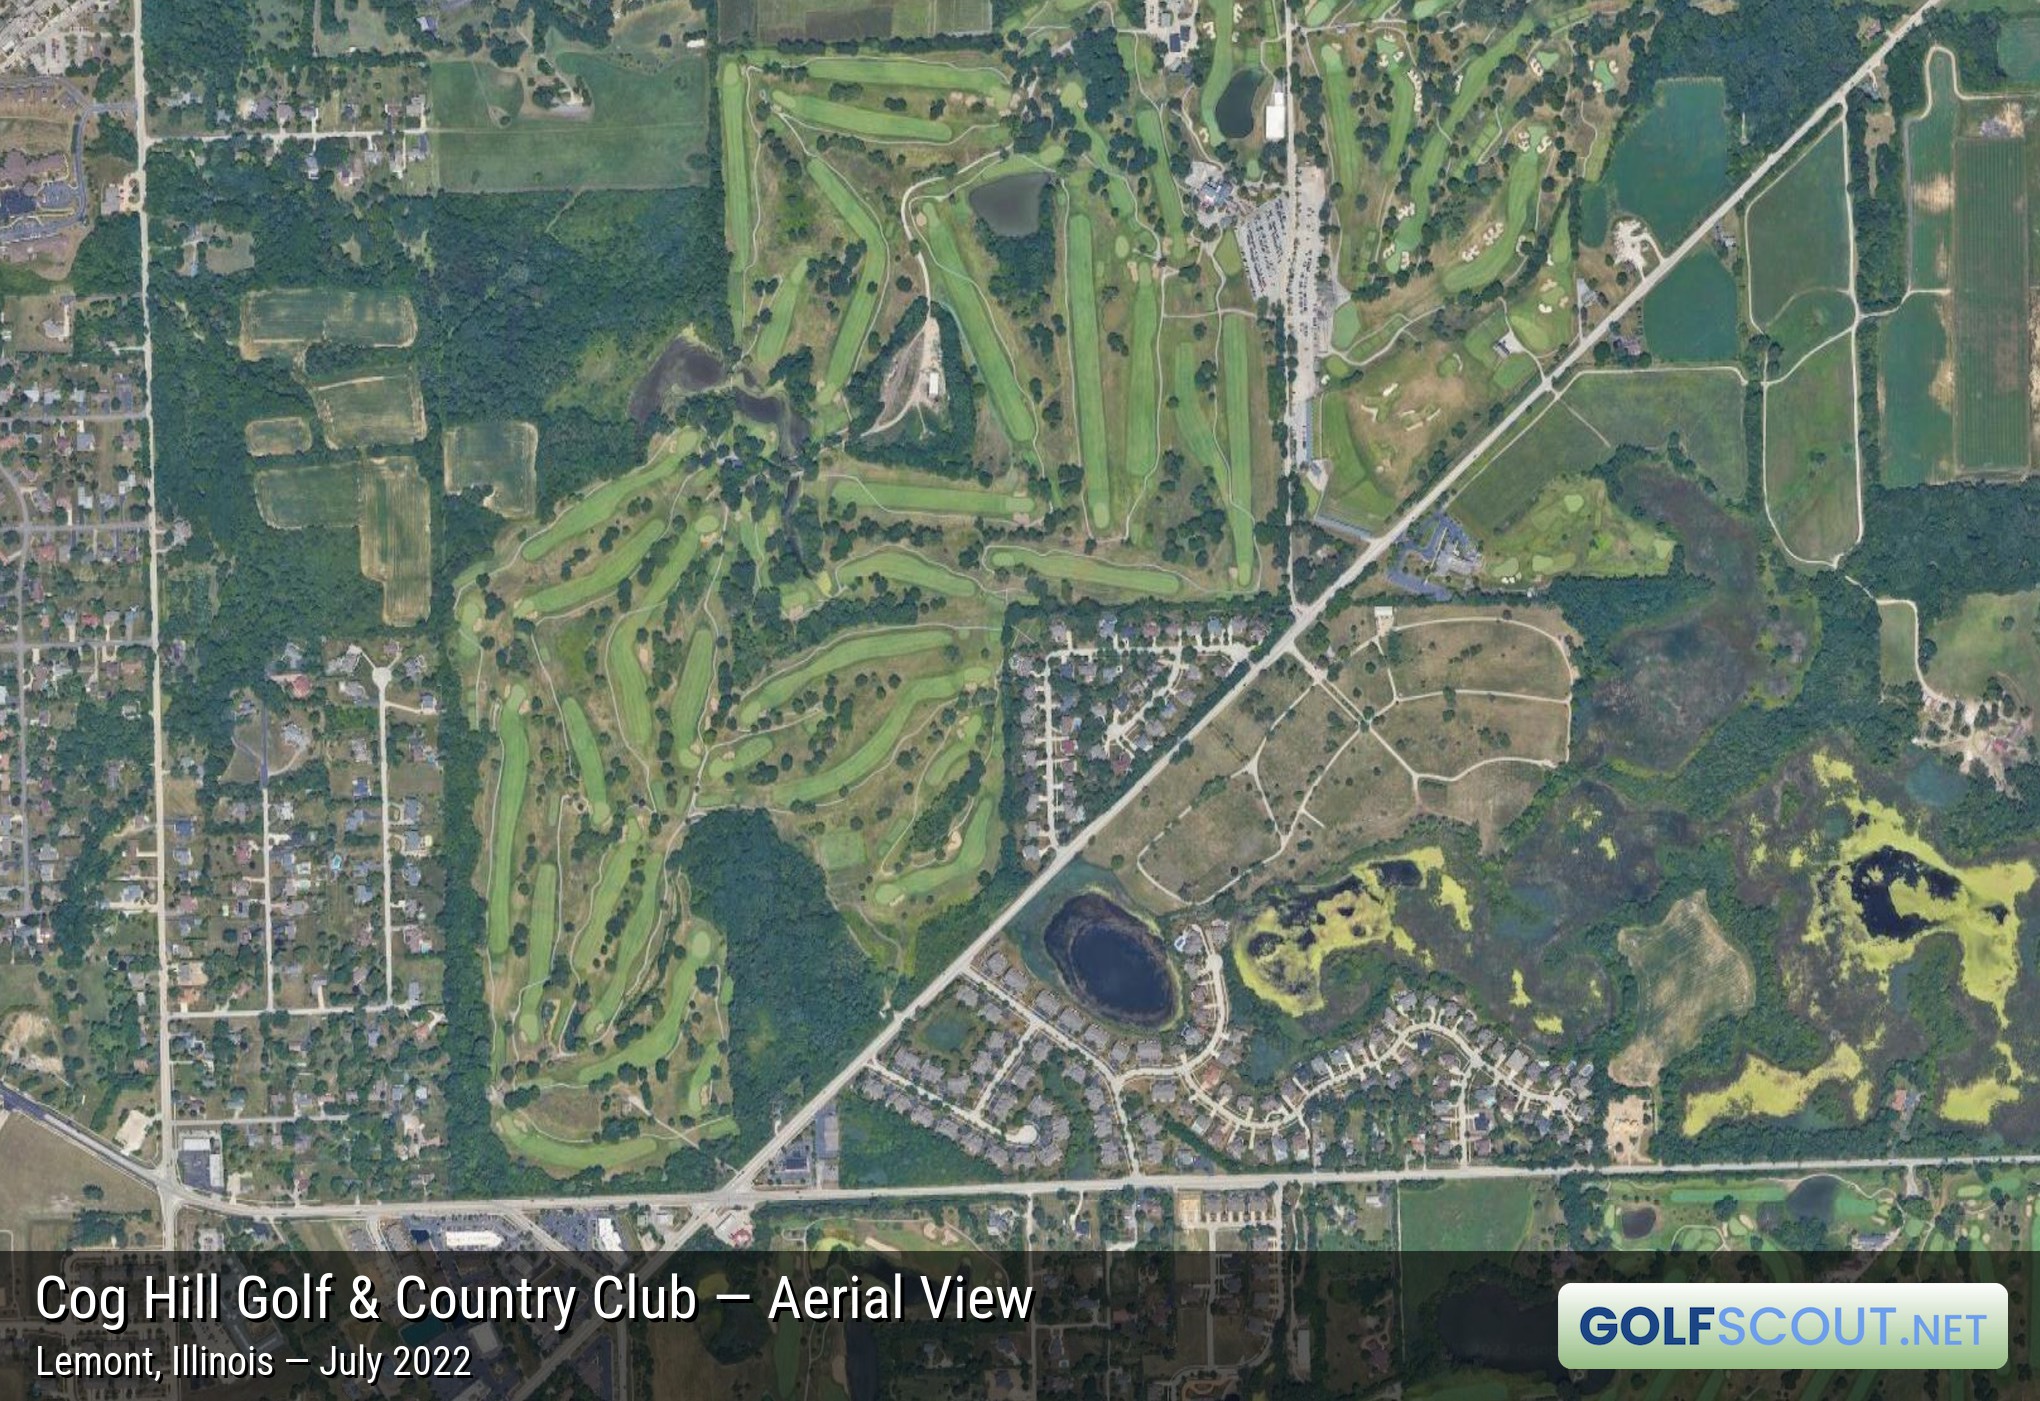 Aerial satellite imagery of Cog Hill Course #3 in Lemont, Illinois. This image is zoomed in on the southwest area of Cog Hill where Courses 1 and 3 are located. Image courtesy of Google Maps.